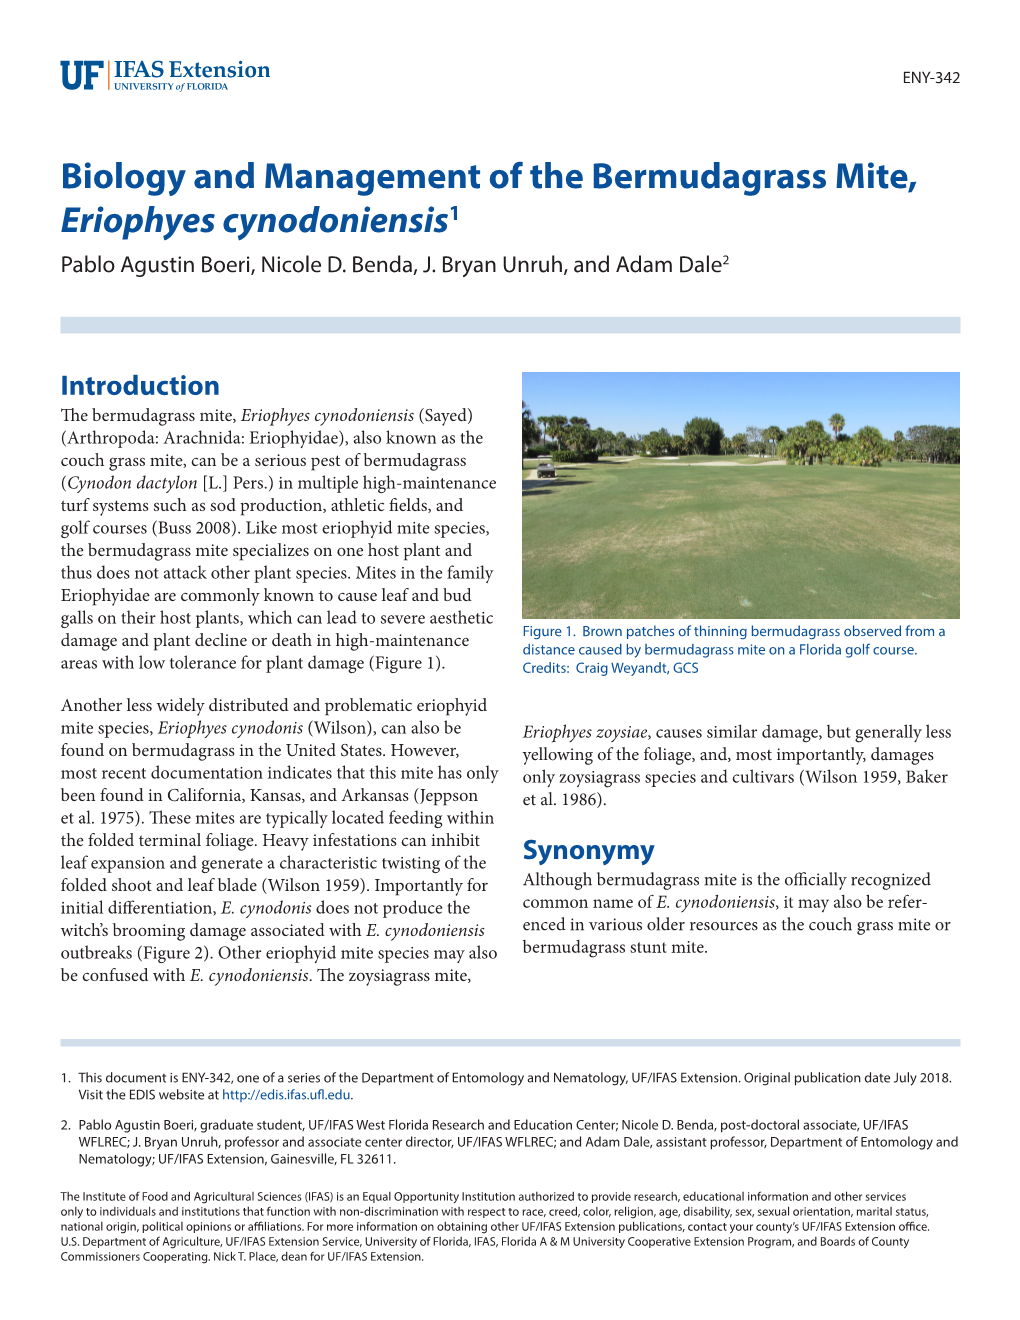 Biology and Management of the Bermudagrass Mite, Eriophyes Cynodoniensis1 Pablo Agustin Boeri, Nicole D